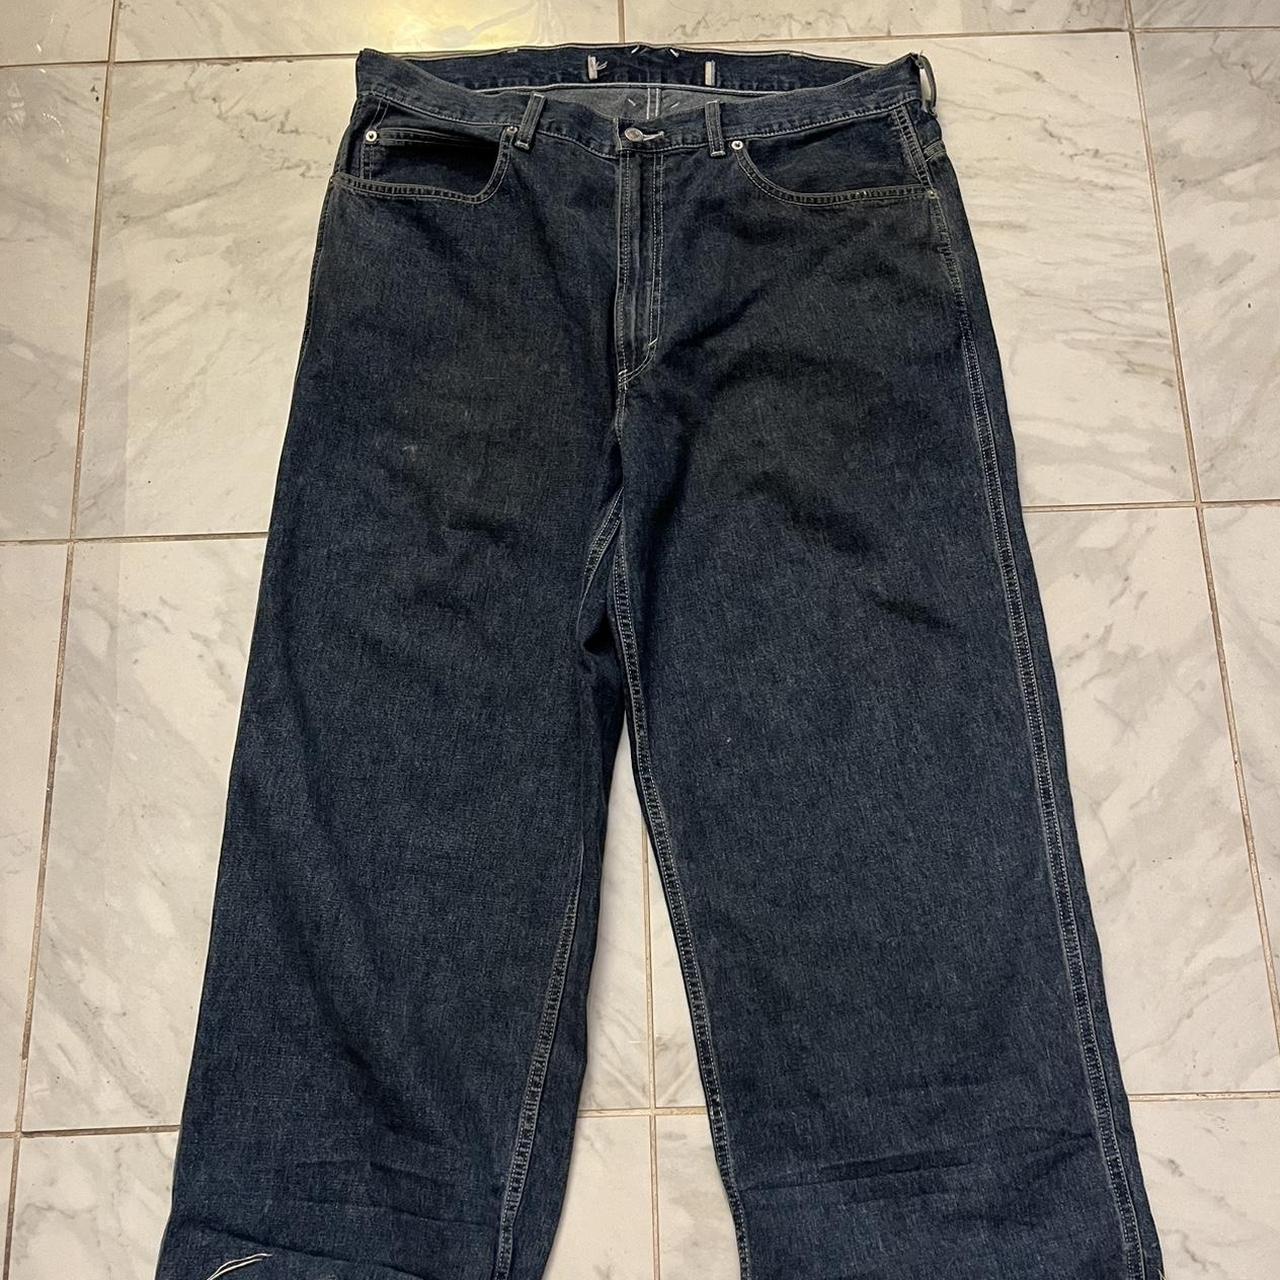 jnco type of jeans baggy asf W 38 Top to bottom... - Depop